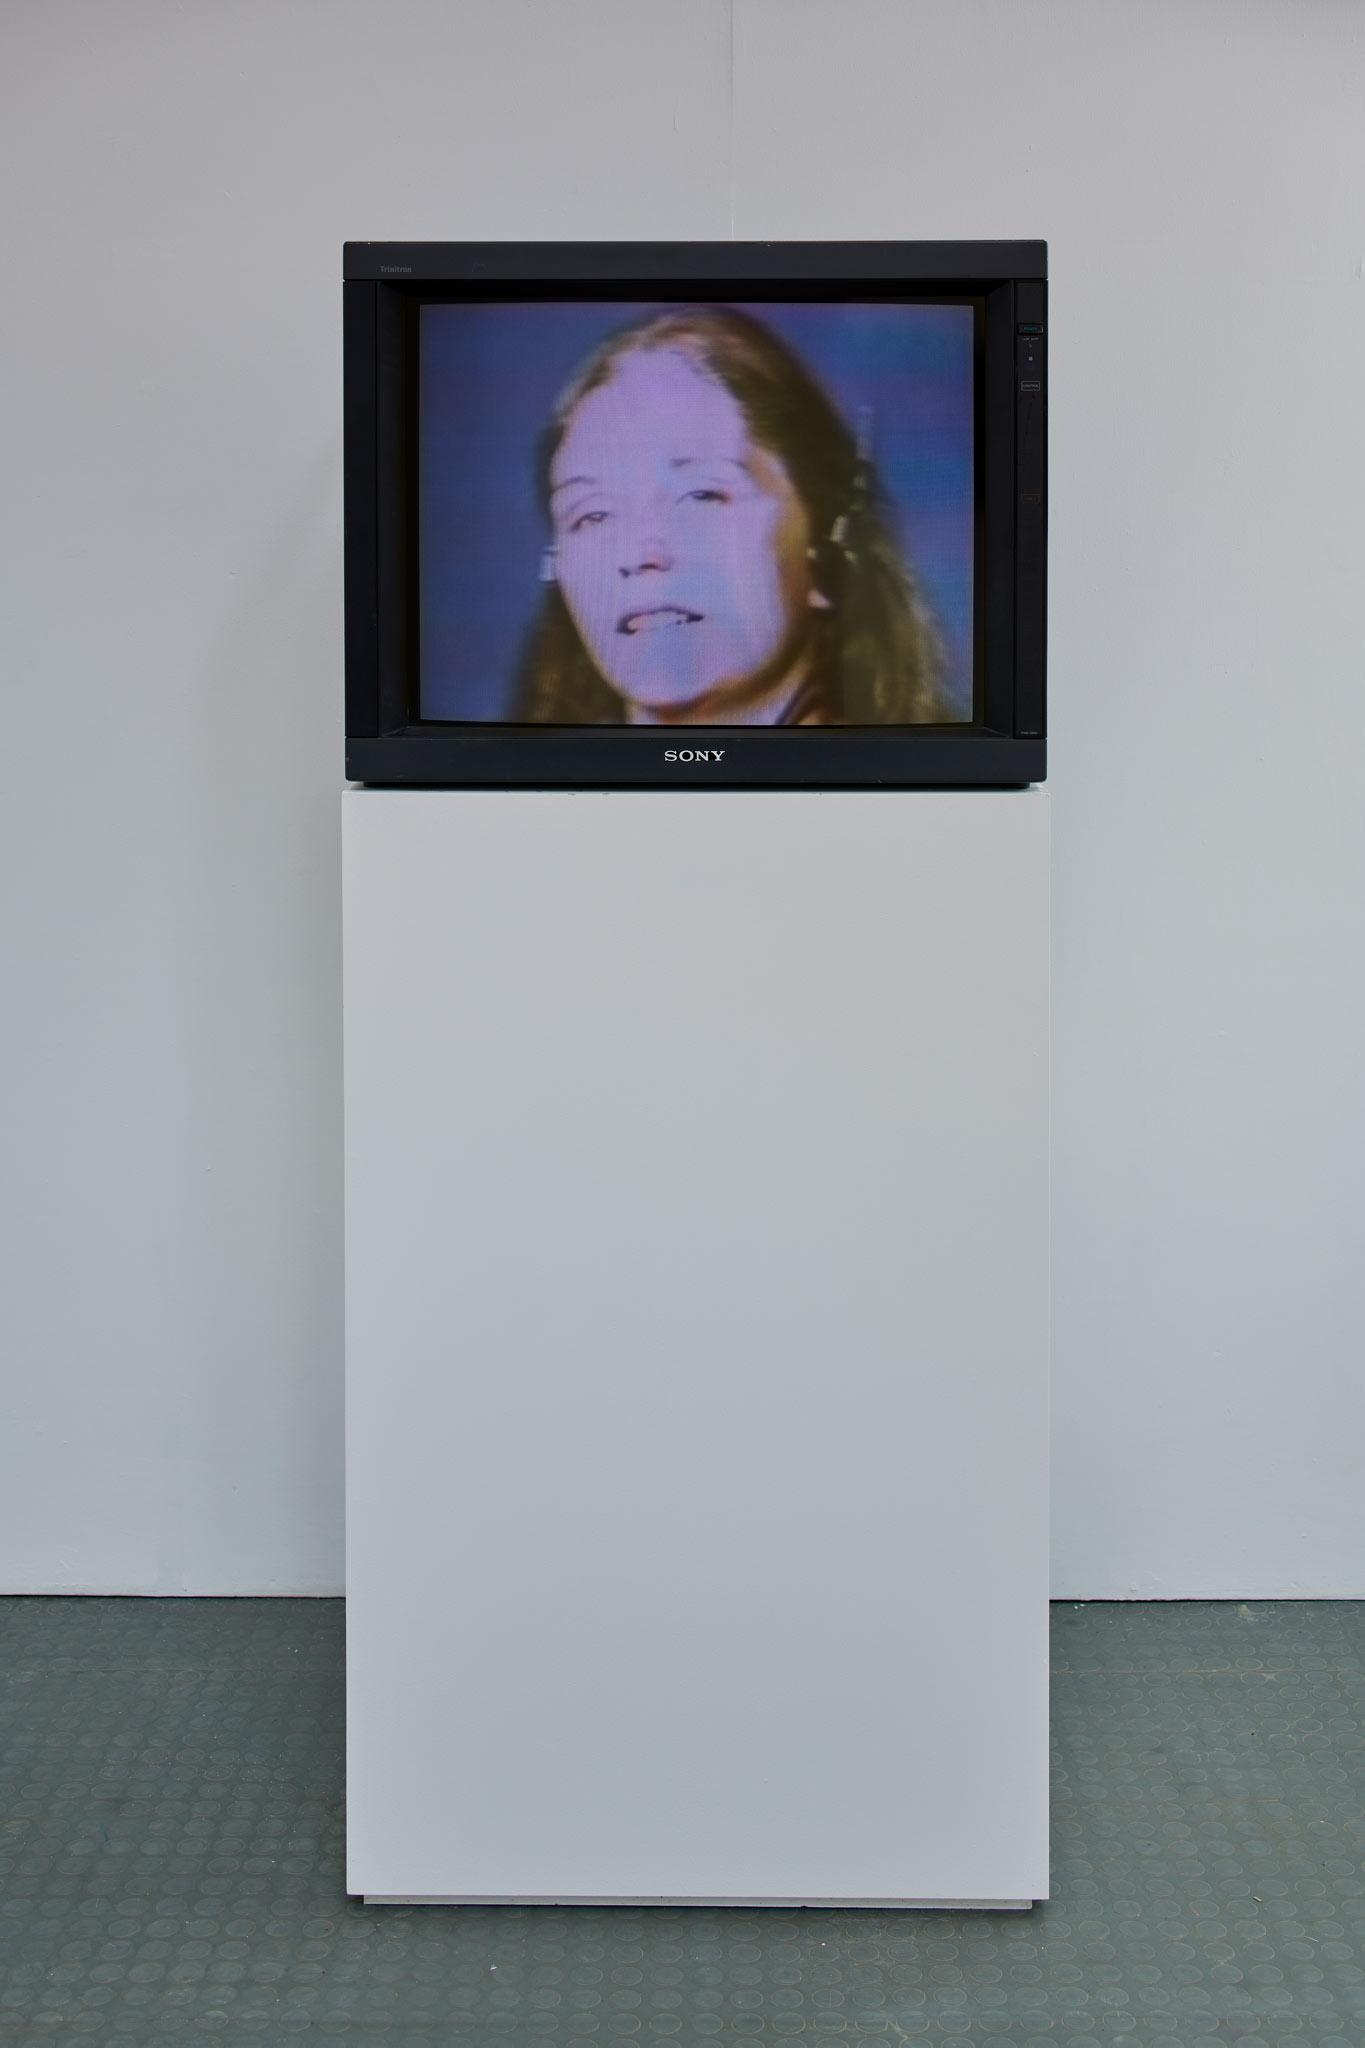 a monitor displaying a woman's face on a pedastal